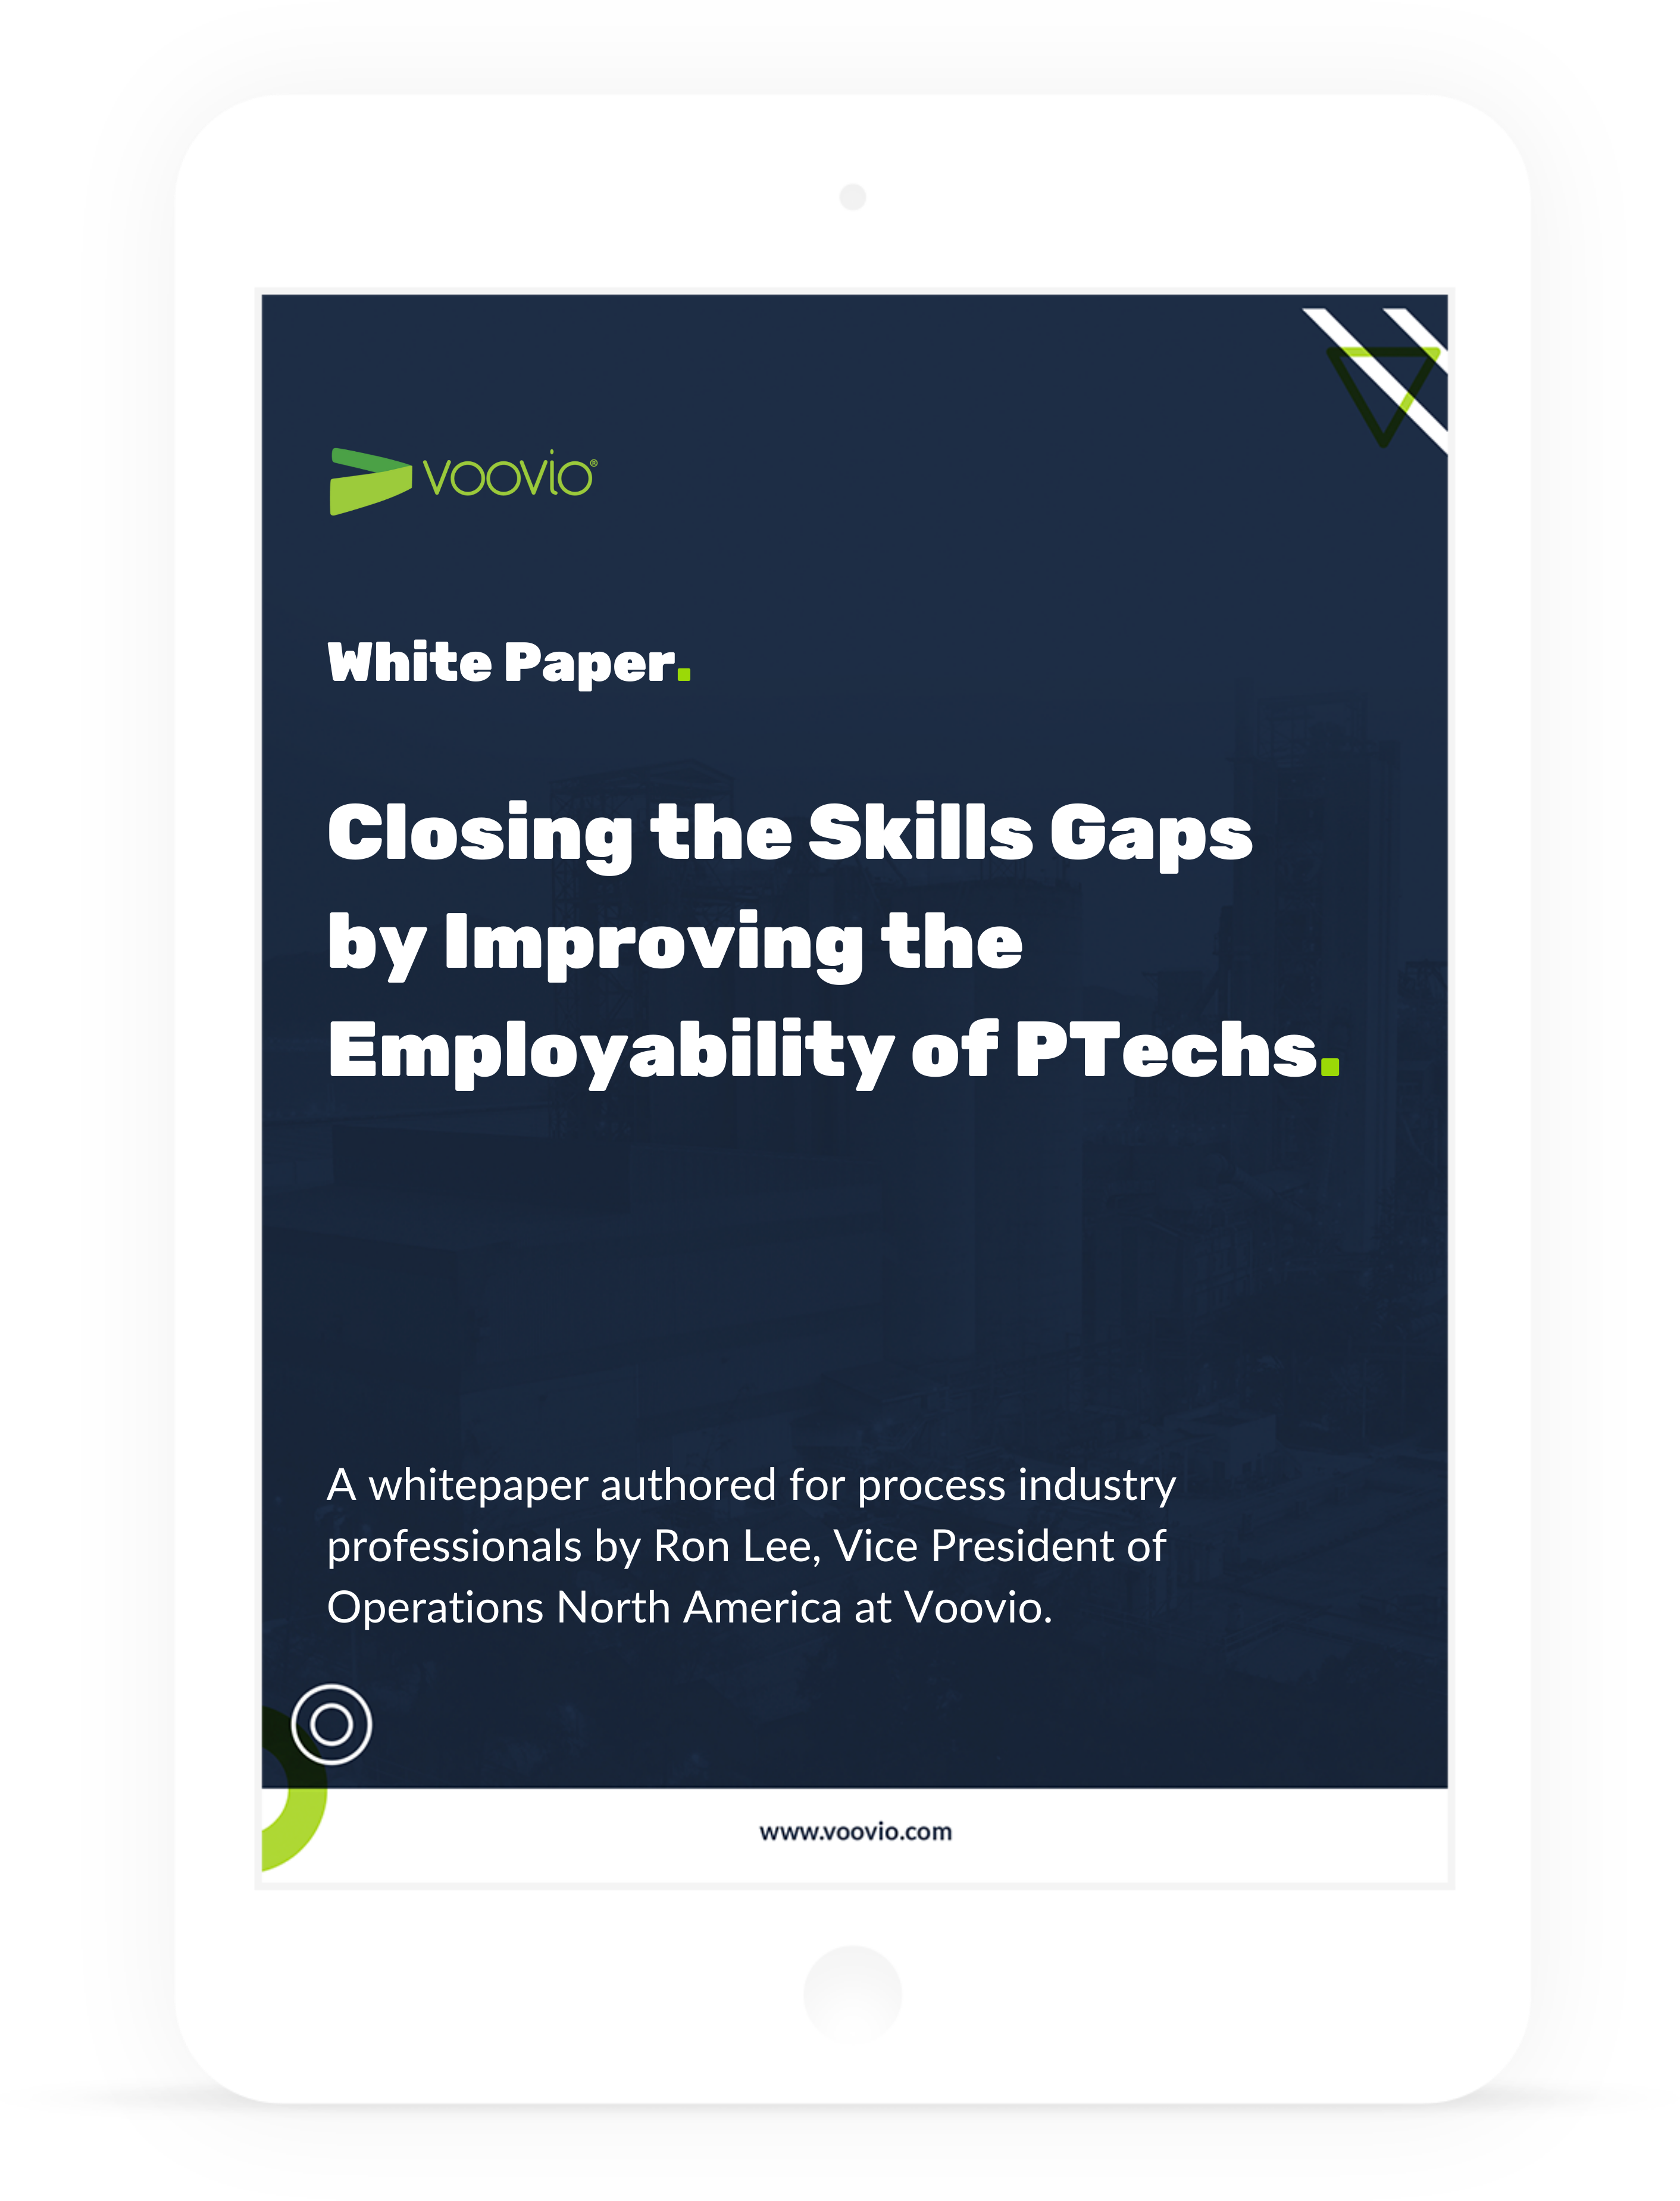 White Paper Voovio Closing the Skills Gaps by Improving the Employability of PTechs